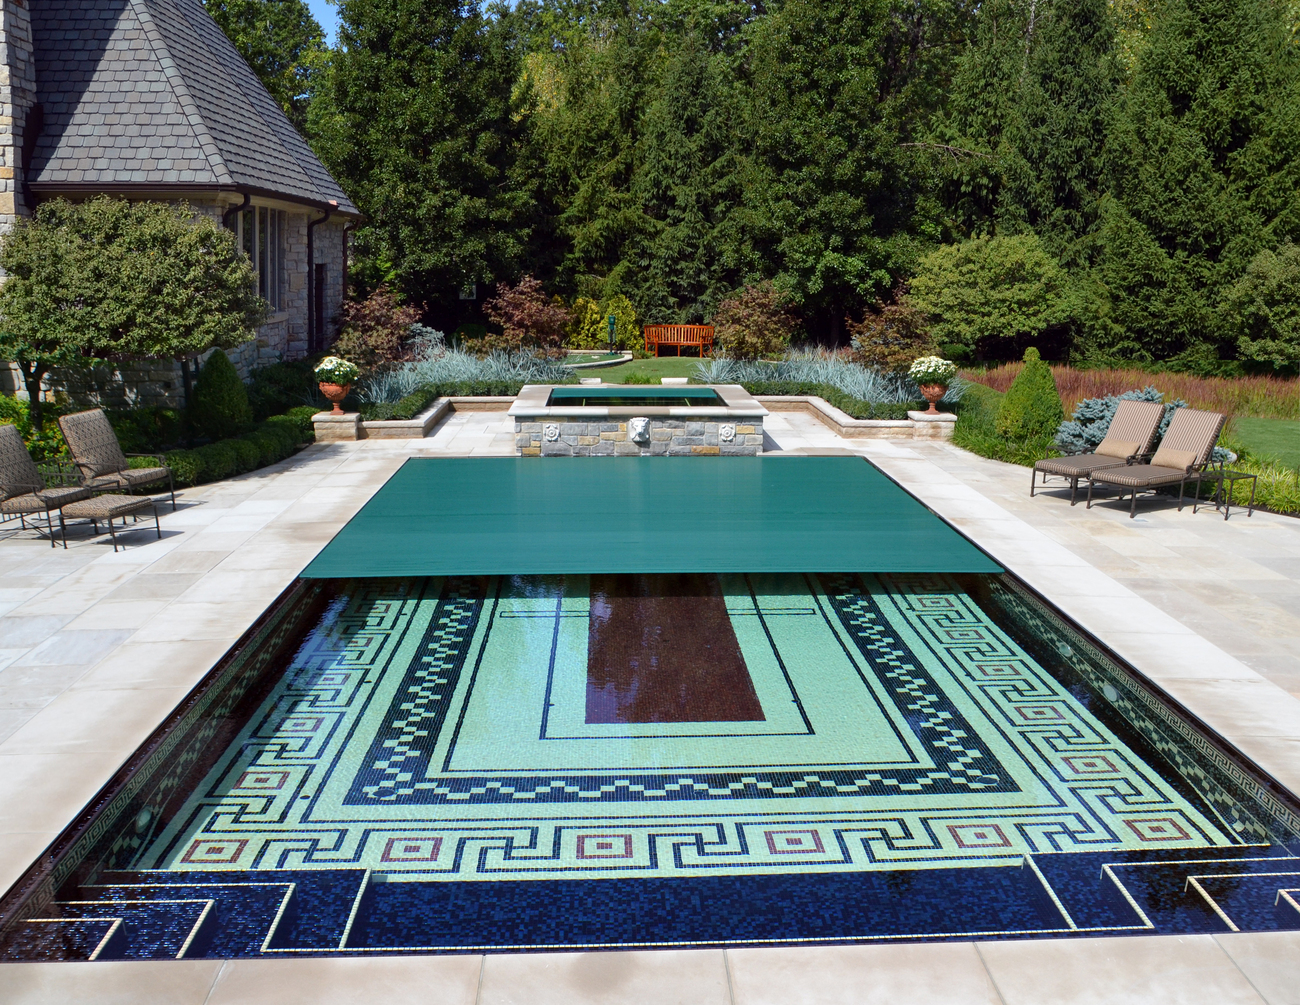 Rectangular pool installed with geometric tiles.